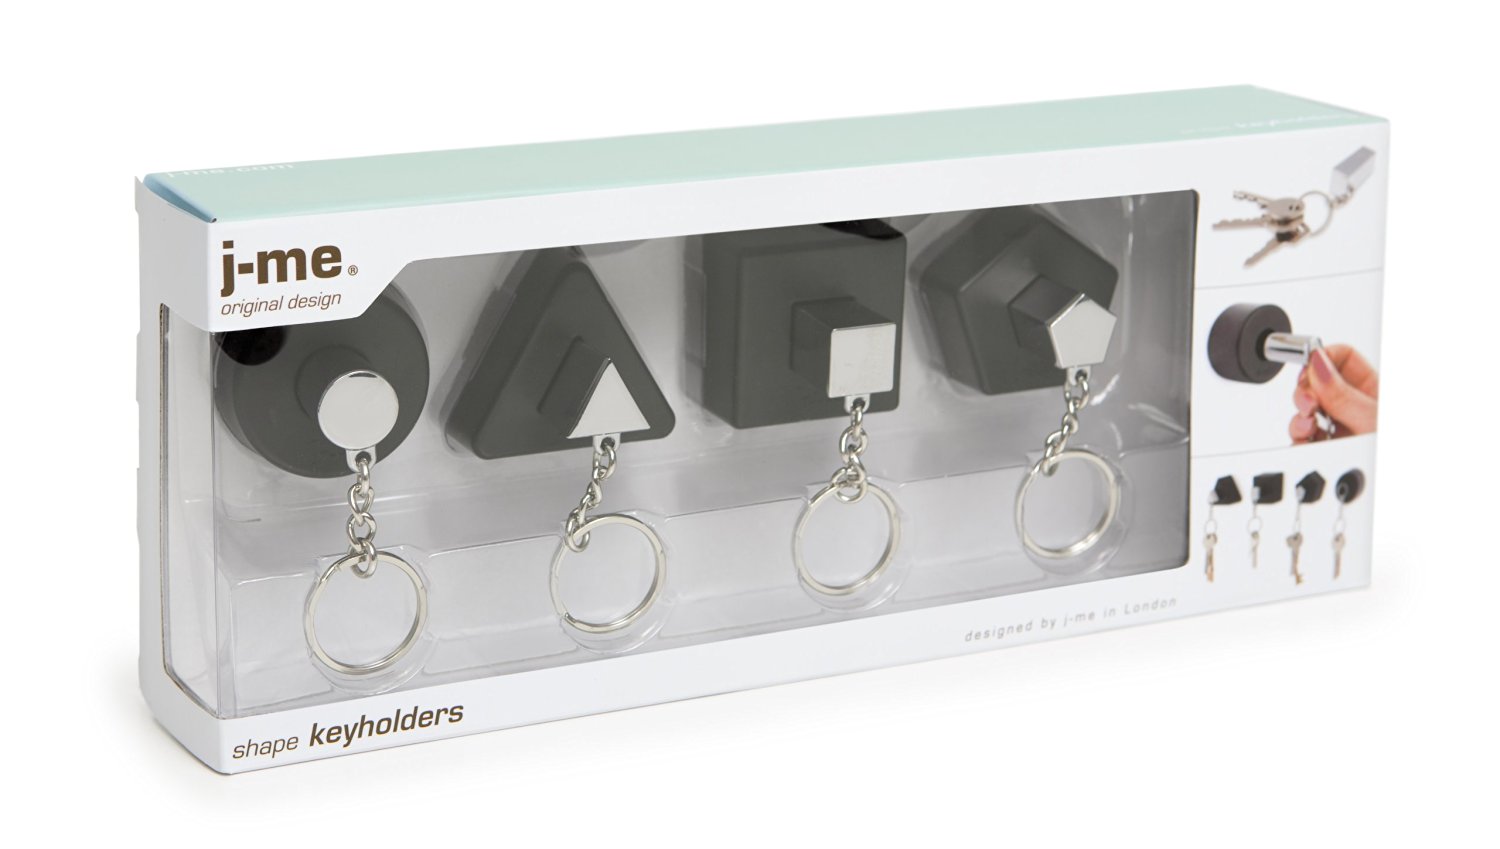 Key Holder Shapes in package